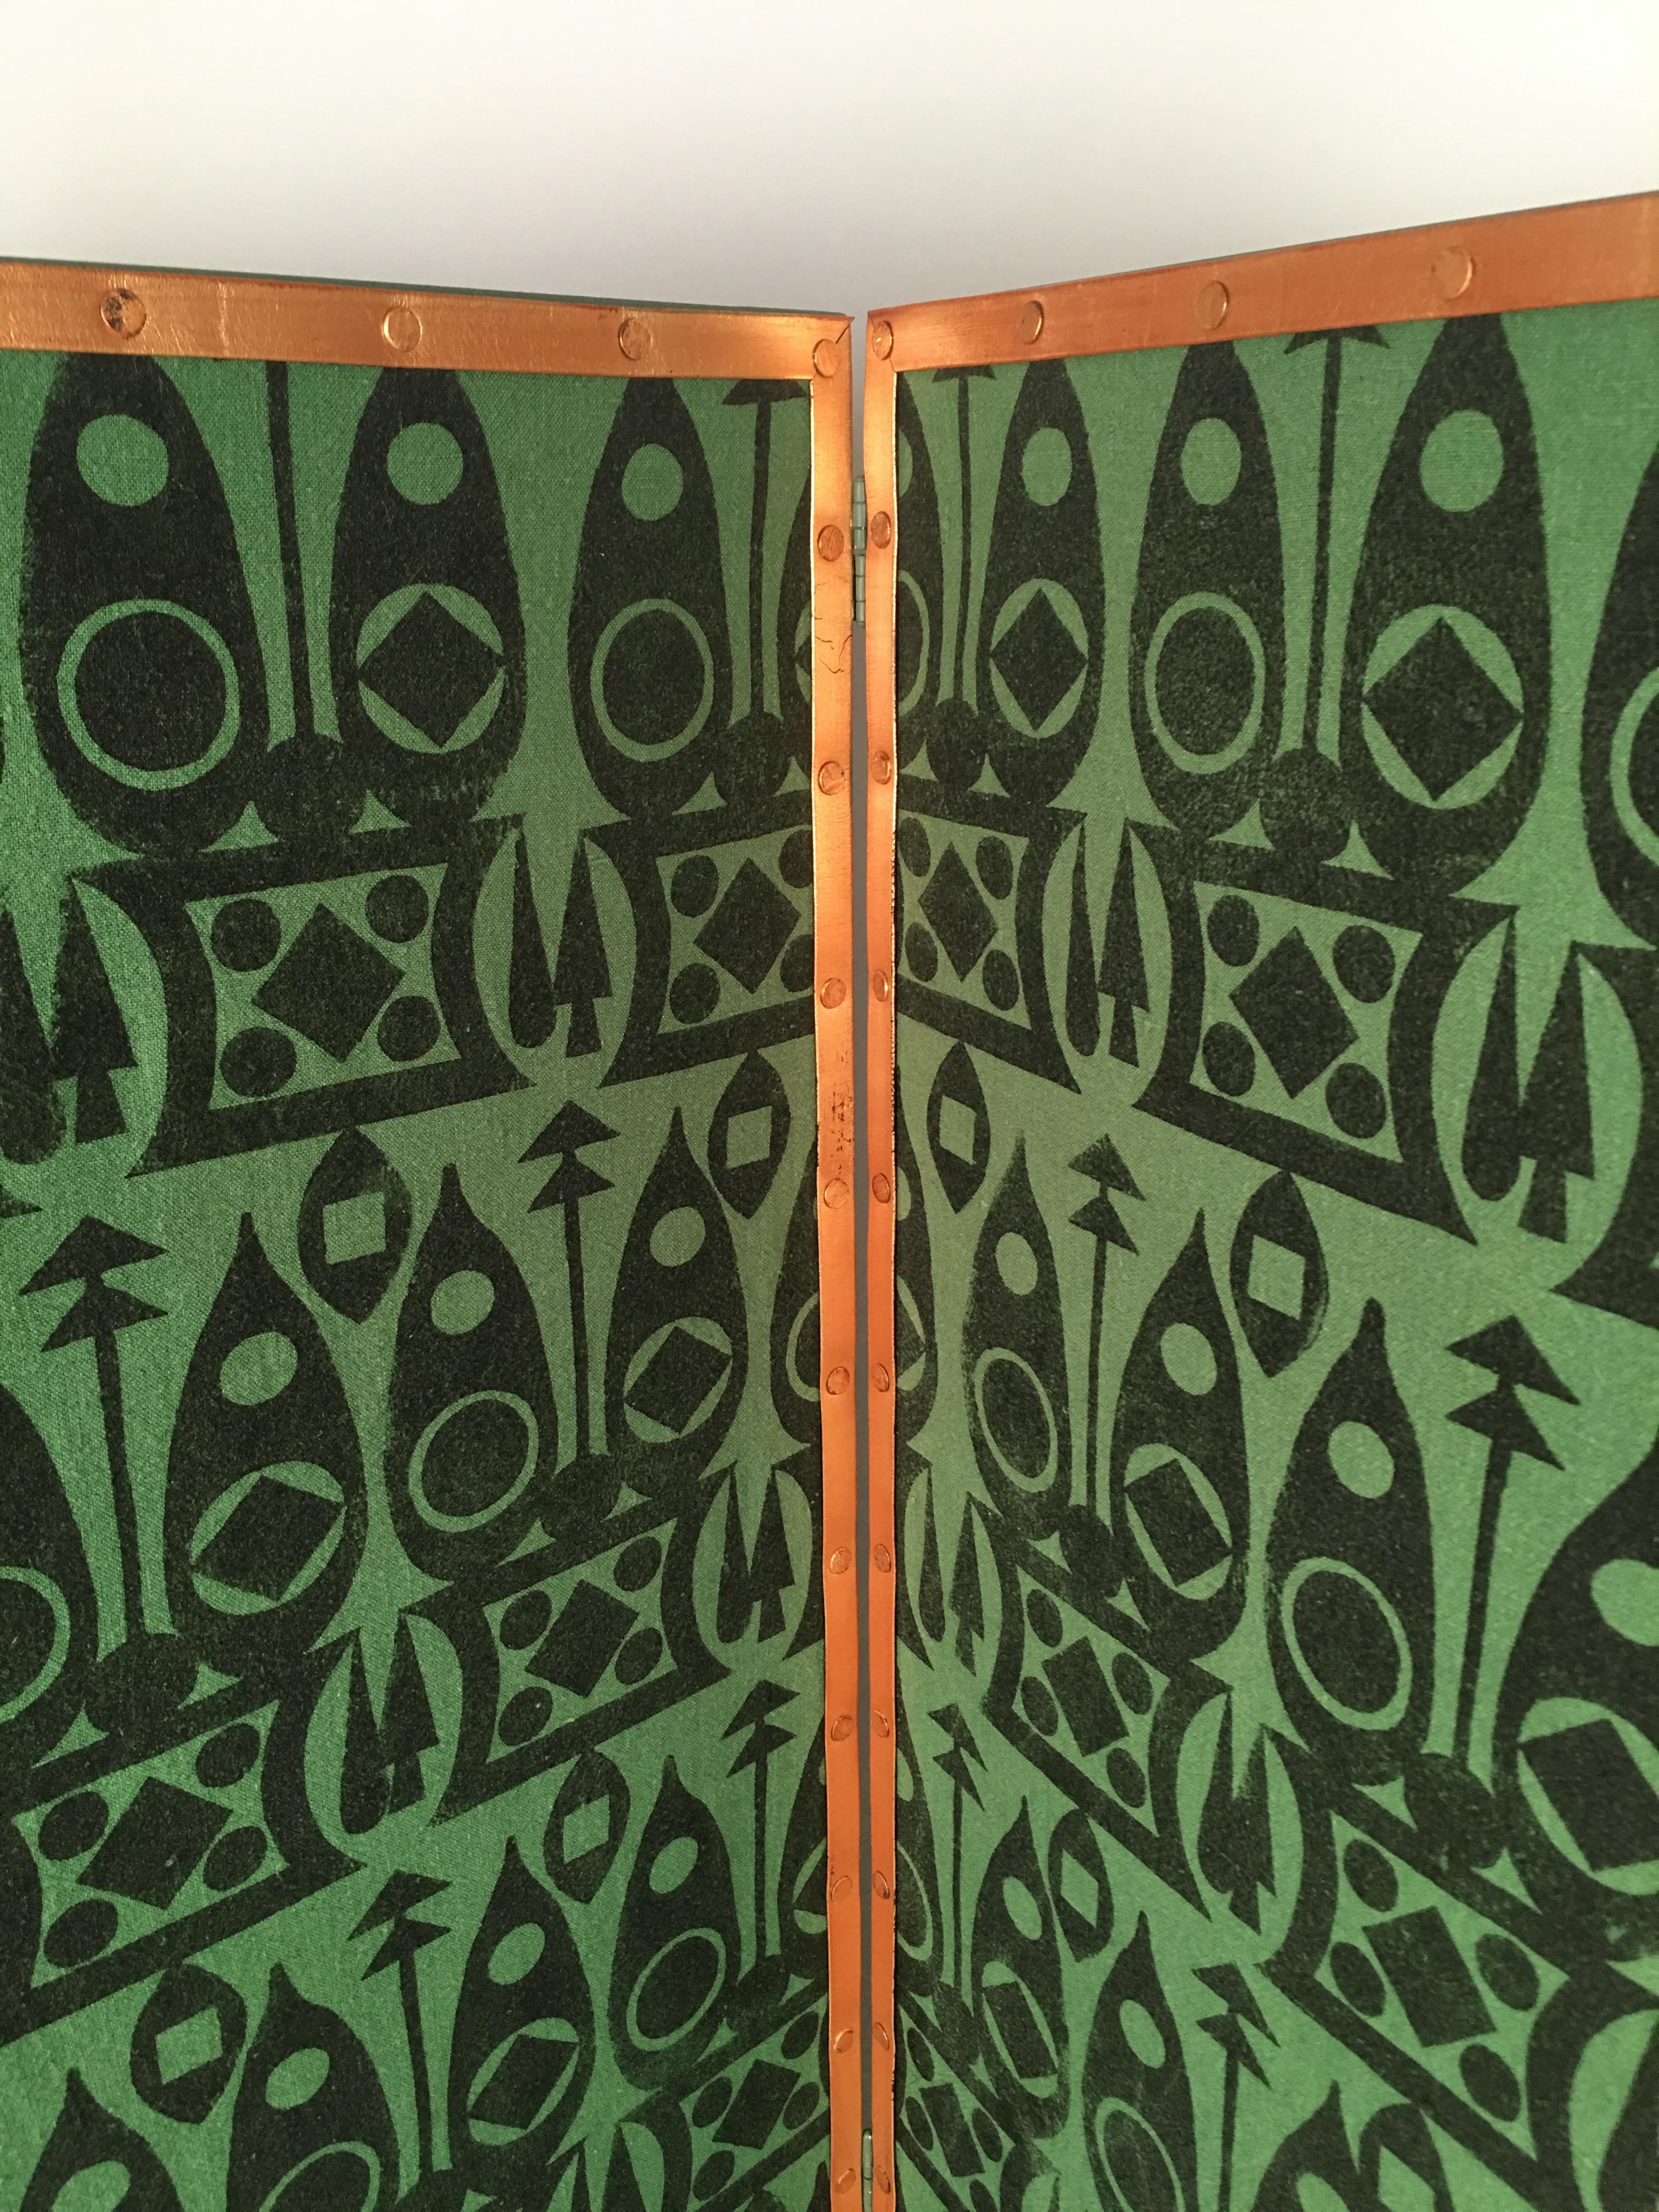 A four panel screen with beautifully made, entirely hand block printed fabric in the geometric Aquitaine pattern, in warm black on evergreen linen, handmade by artist Charles Dort in the studios of Drusus Tabor in coastal Massachusetts. Each design